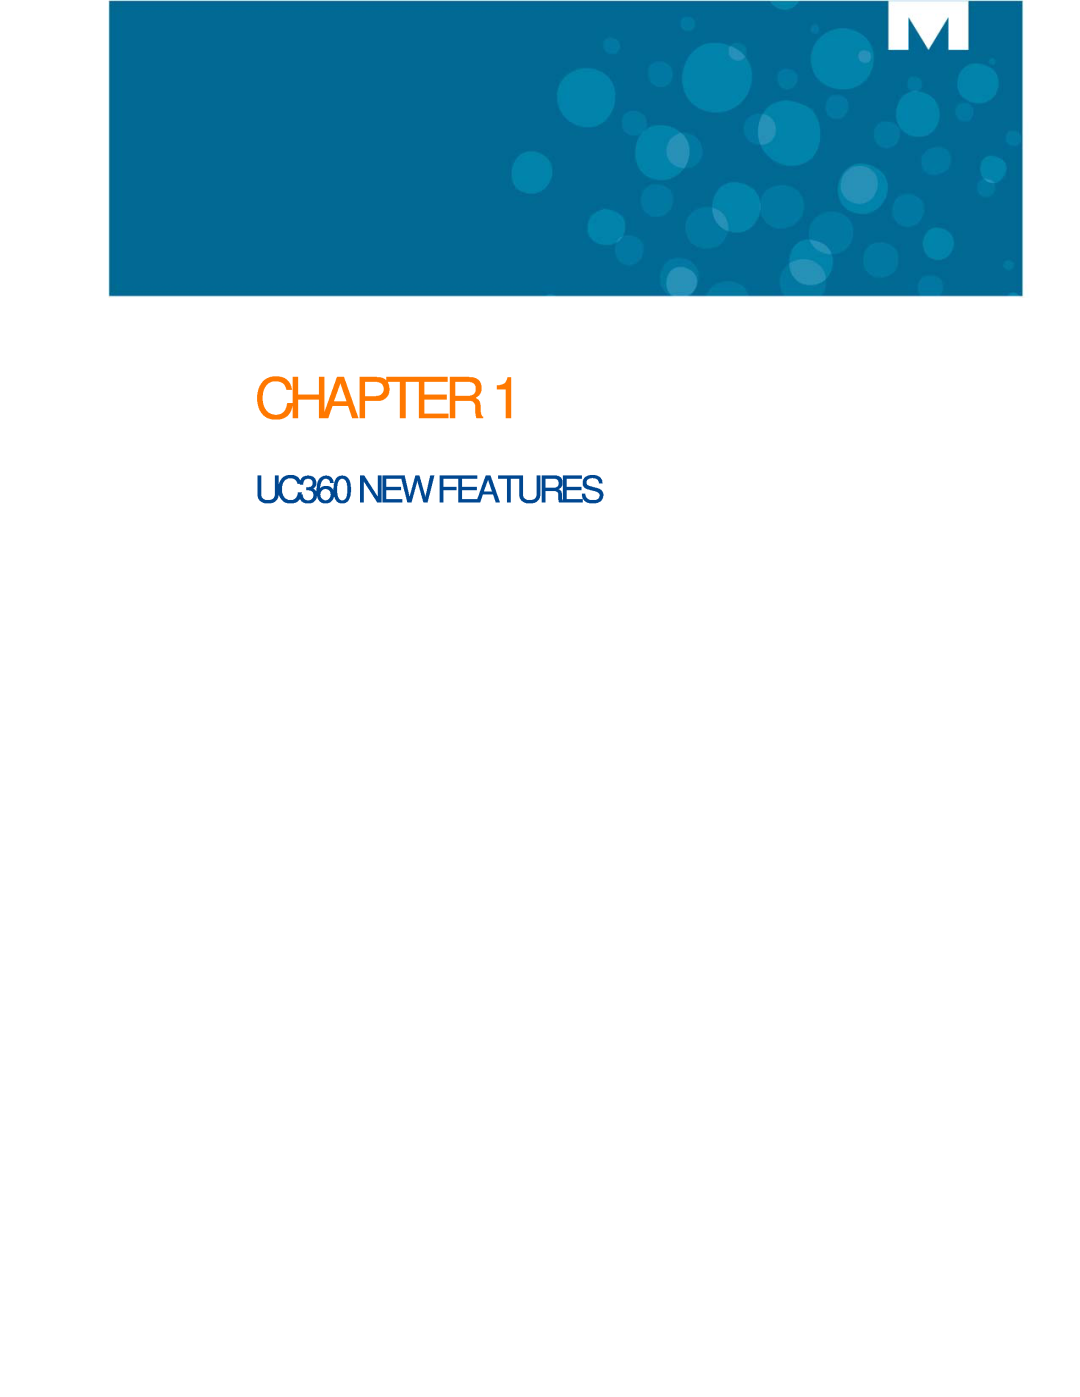 Mitel manual Chapter, UC360 NEW FEATURES 